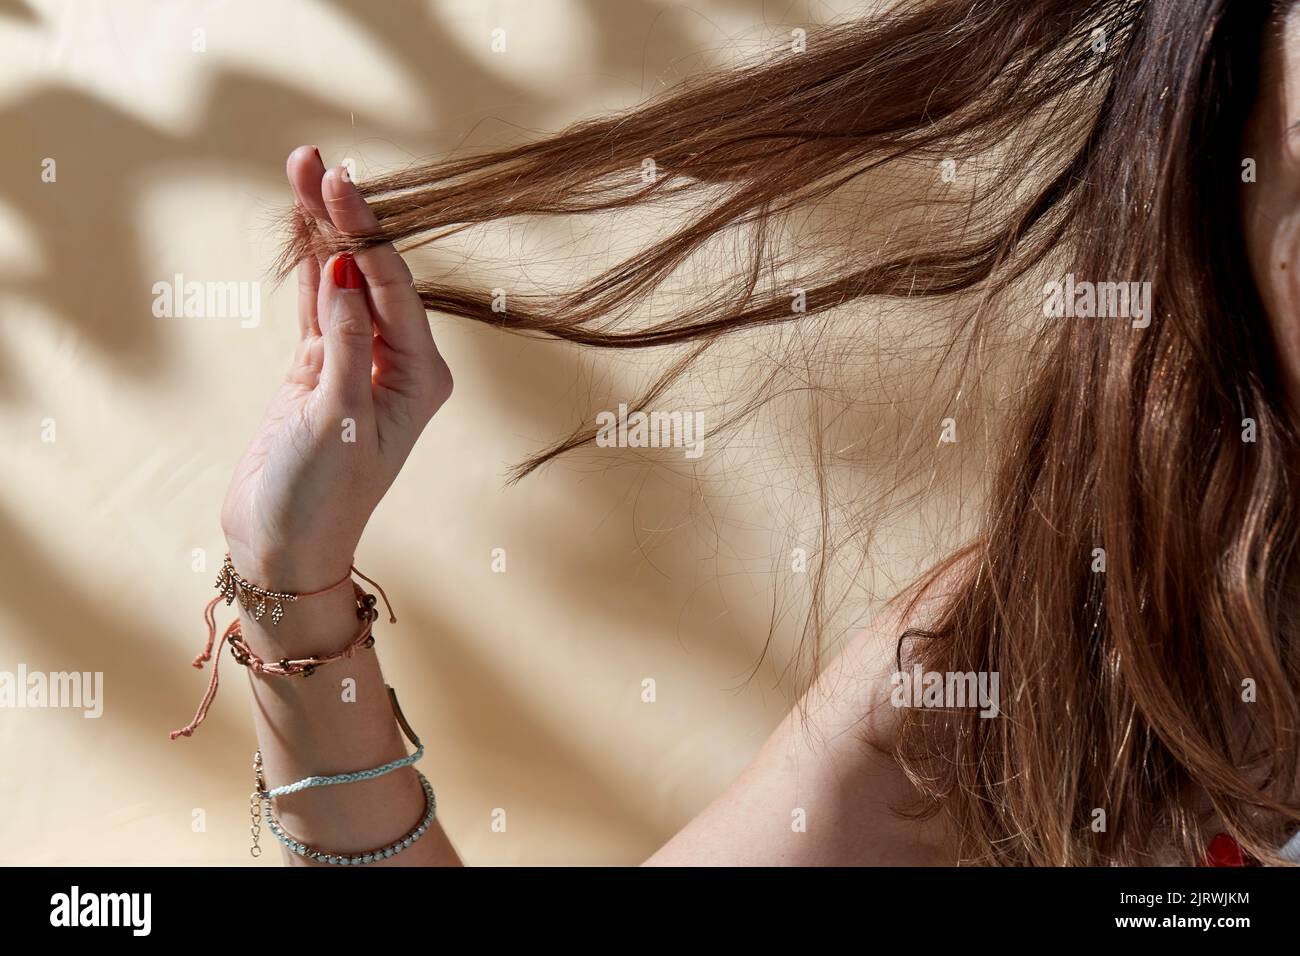 close up of woman holding hair strand Stock Photo